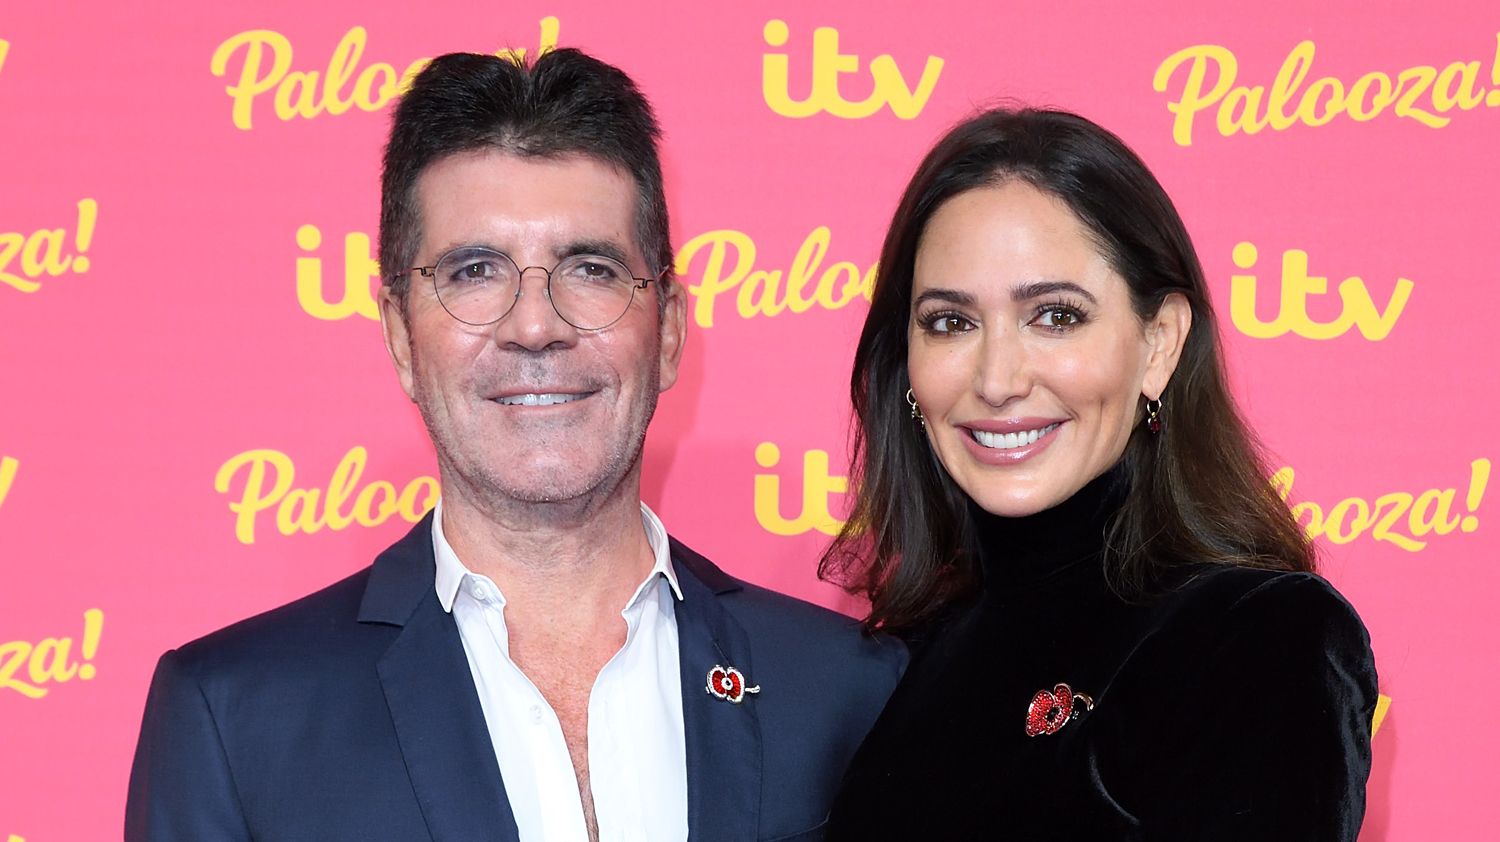 Simon Cowell, Lauren Silverman are engaged, more of their love history